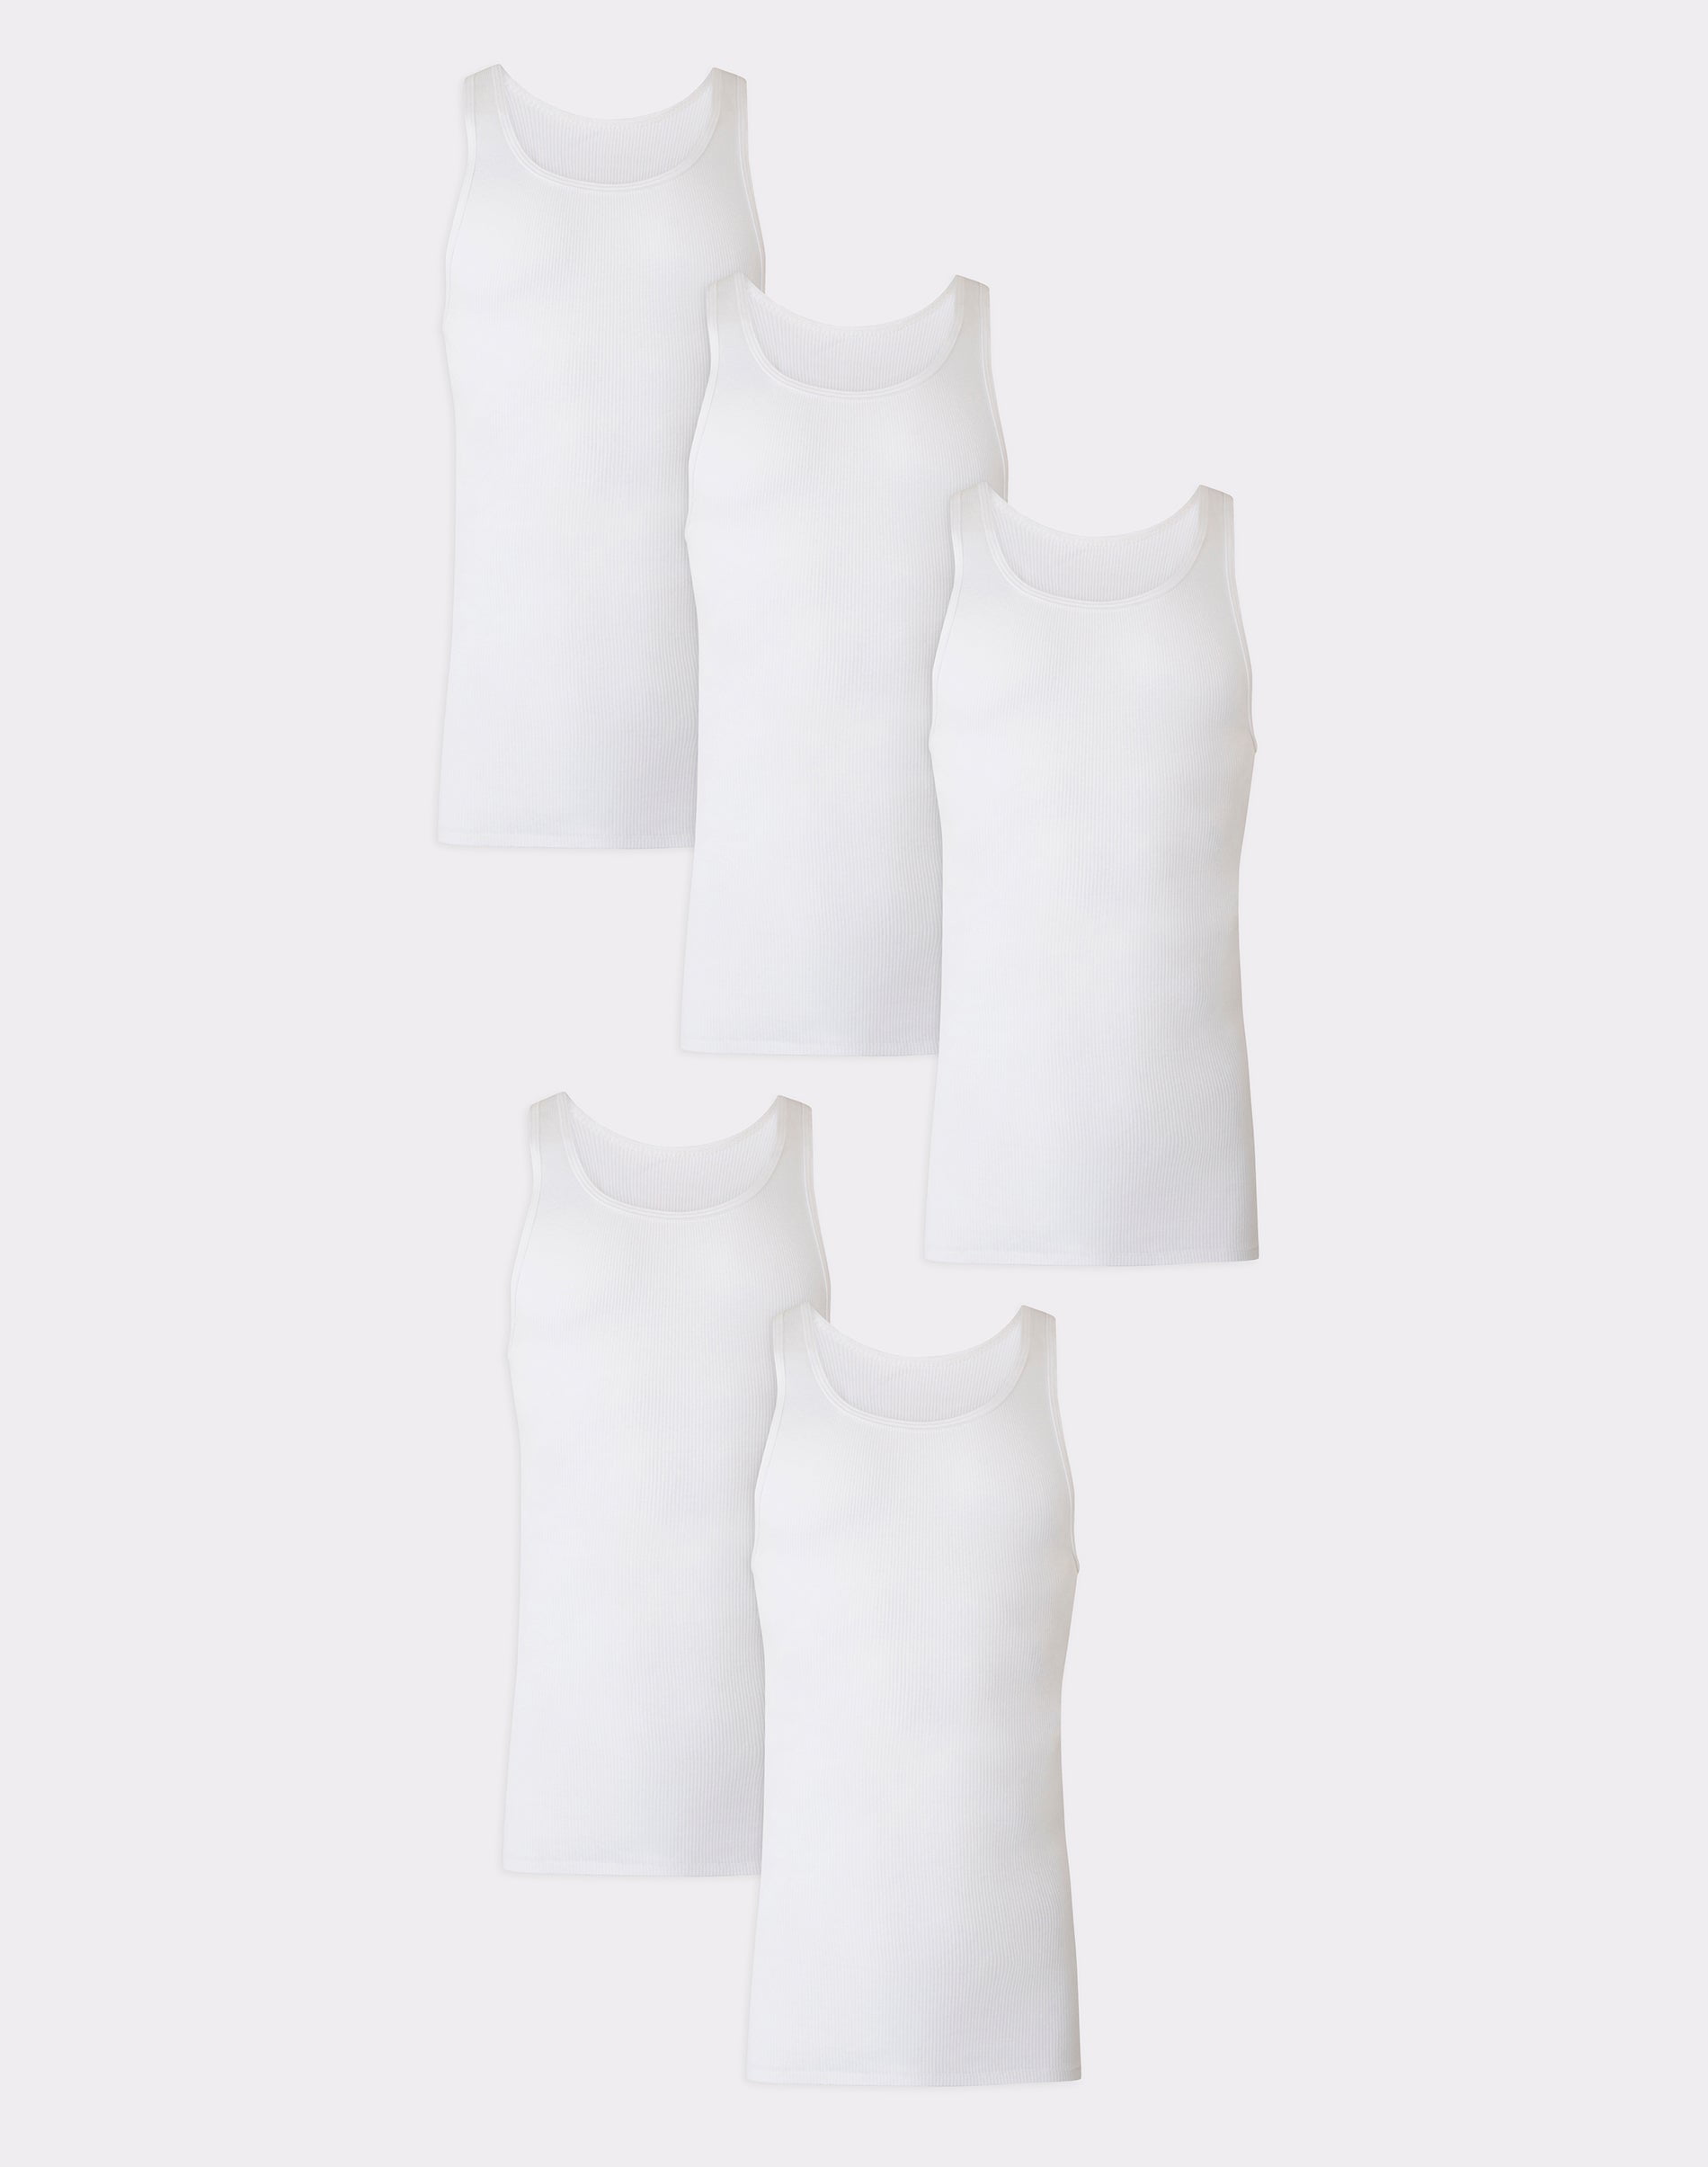 Hanes Ultimate Tall Men’s Tank Top Undershirts Pack, Cotton, 5-Pack ...